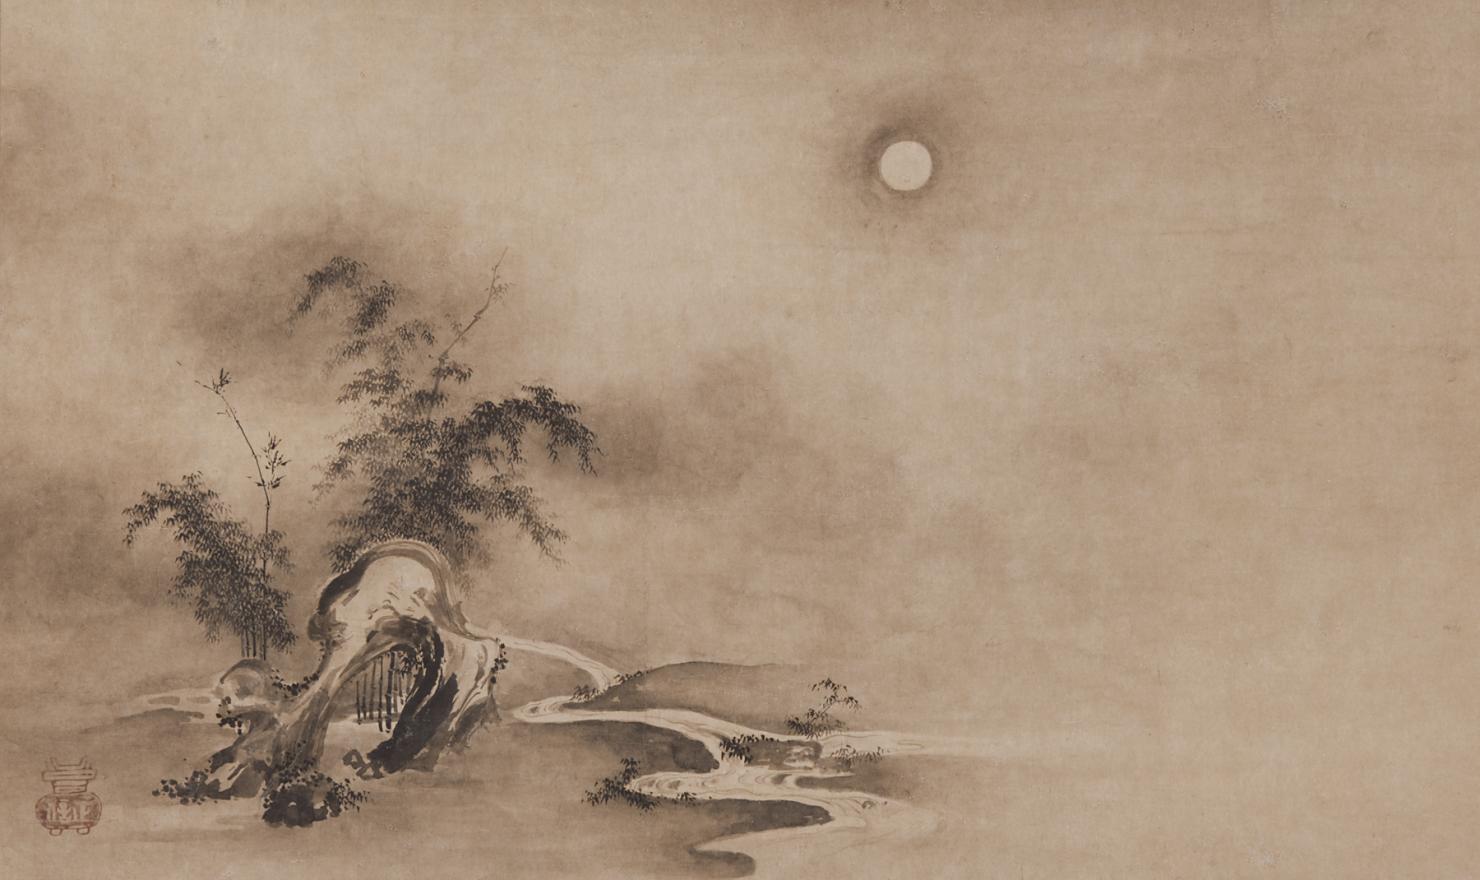 sepia-toned painting of the full moon over a winding river flowing by a small stand of bamboo trees